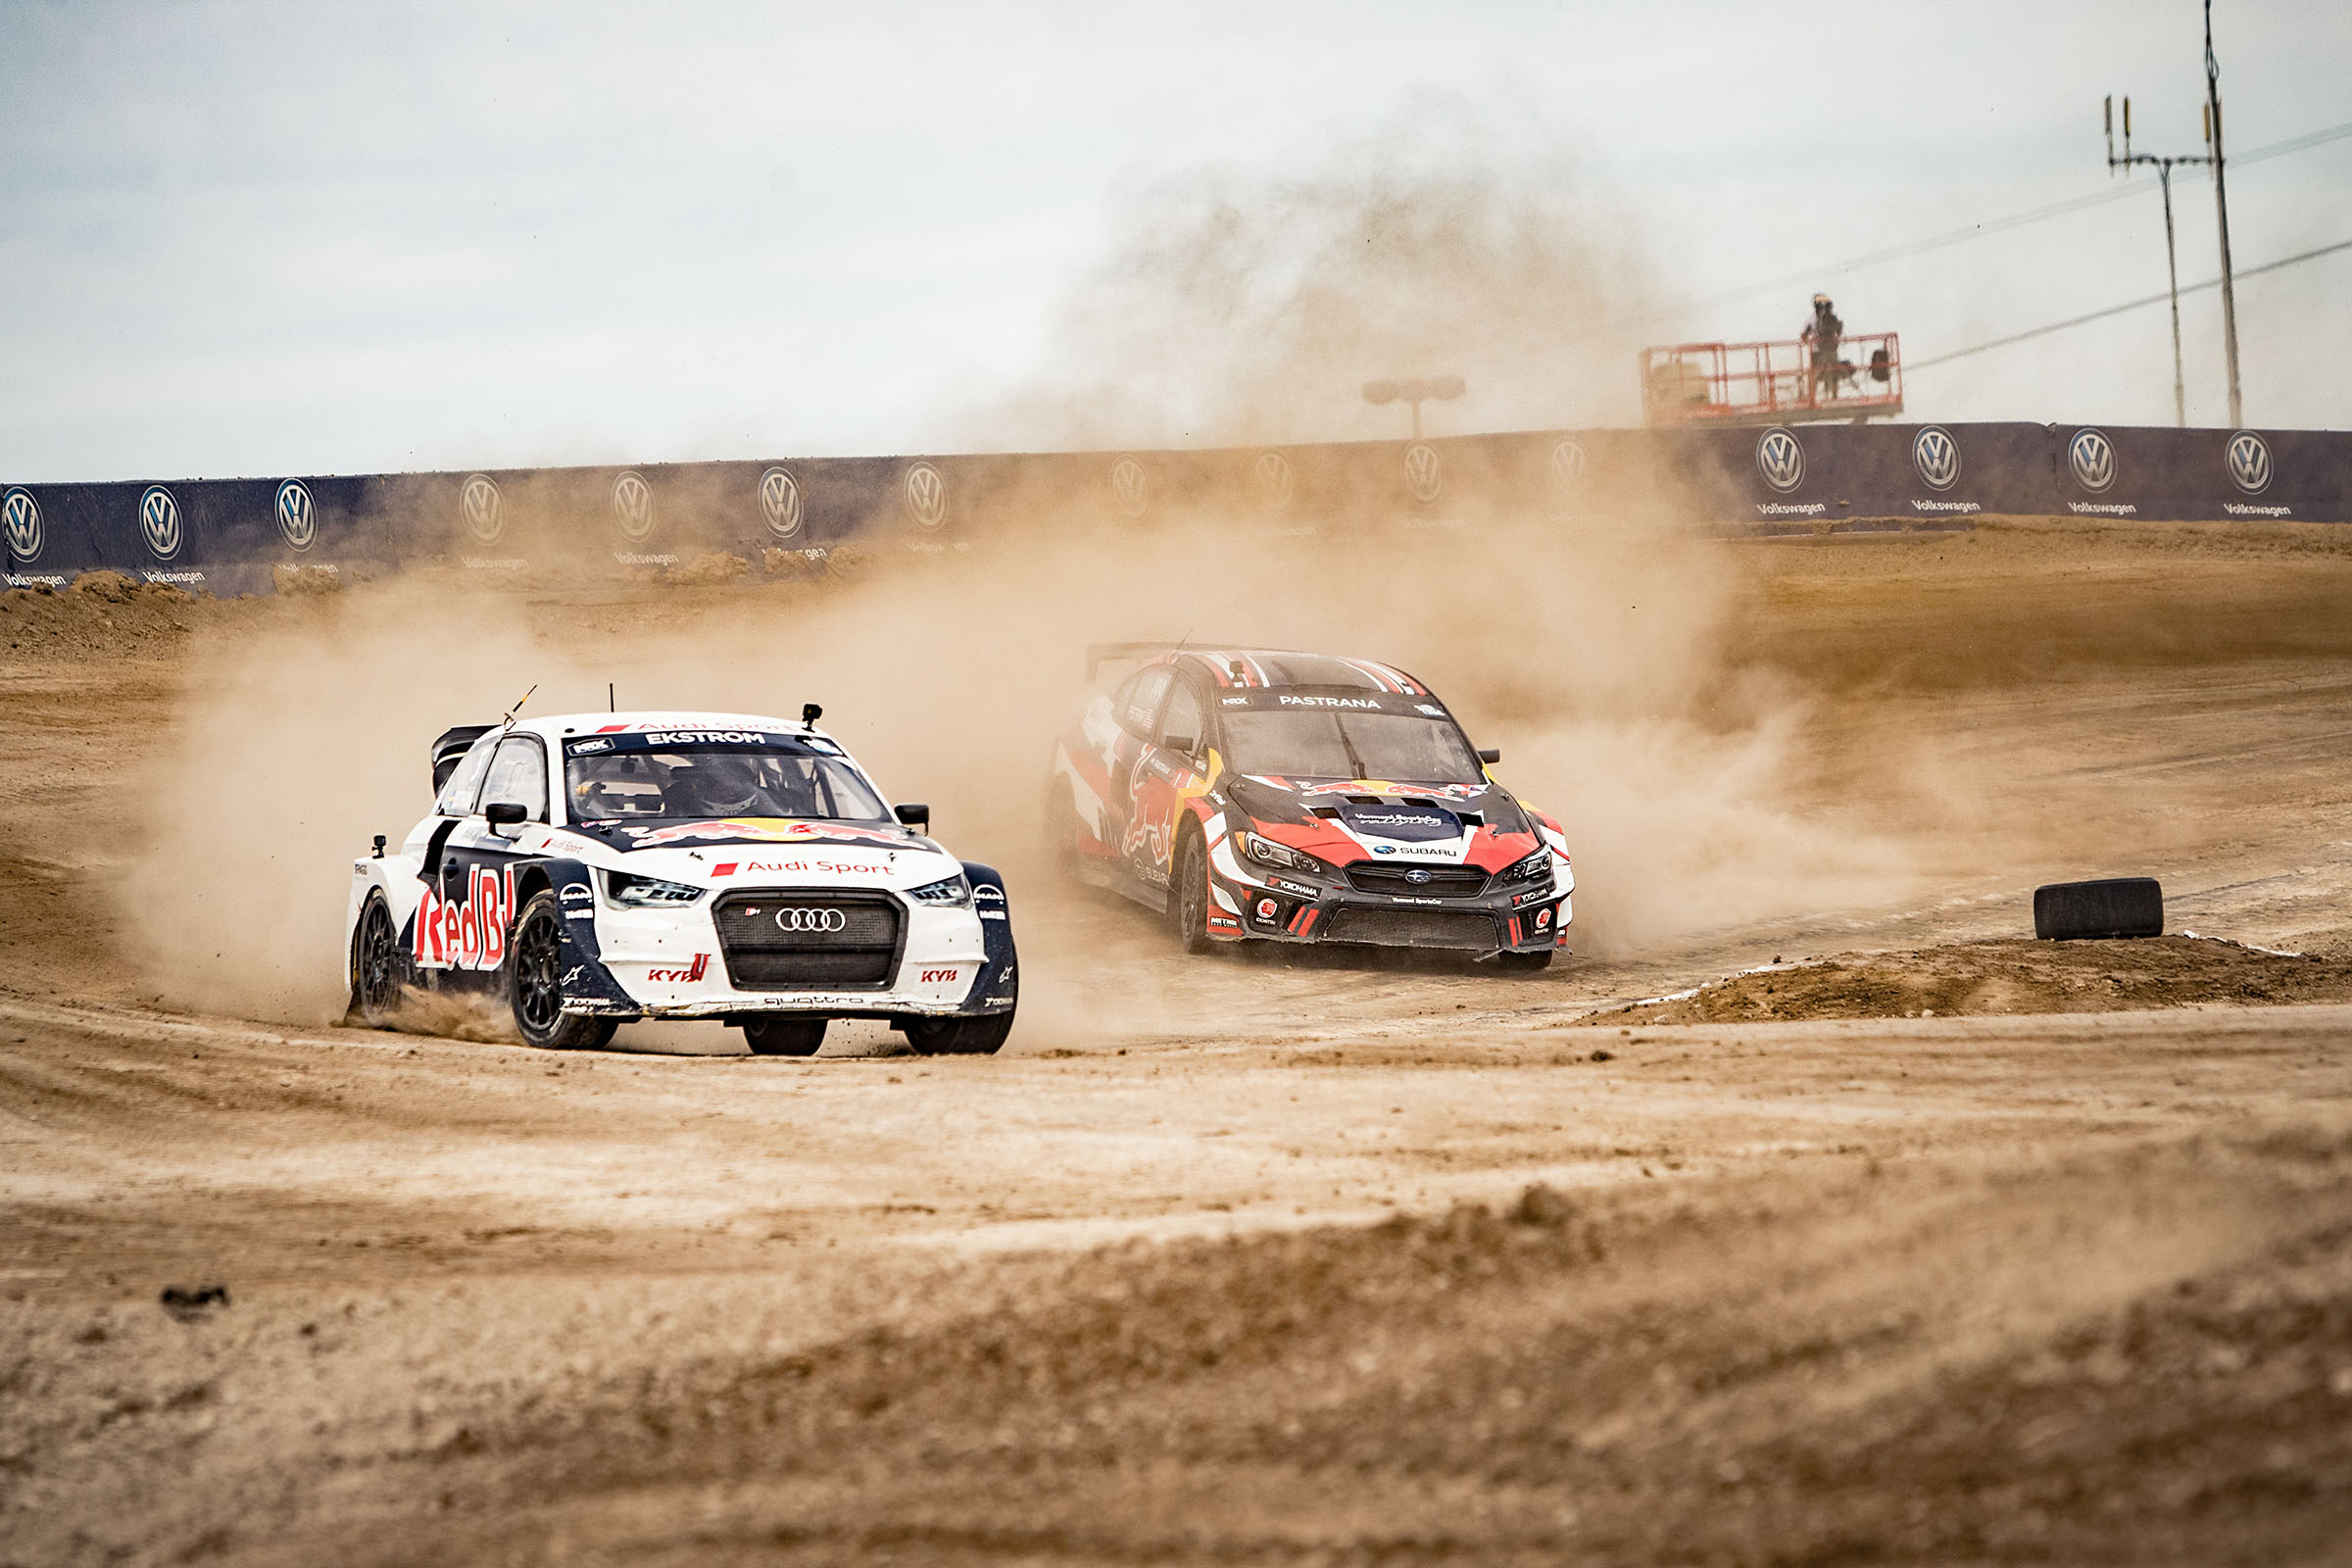 The Nitro Rallycross field for 2019 has been announced for the Nitro World Games, which is happening at Utah Motorsports Campus on Saturday, August 17, 2019.